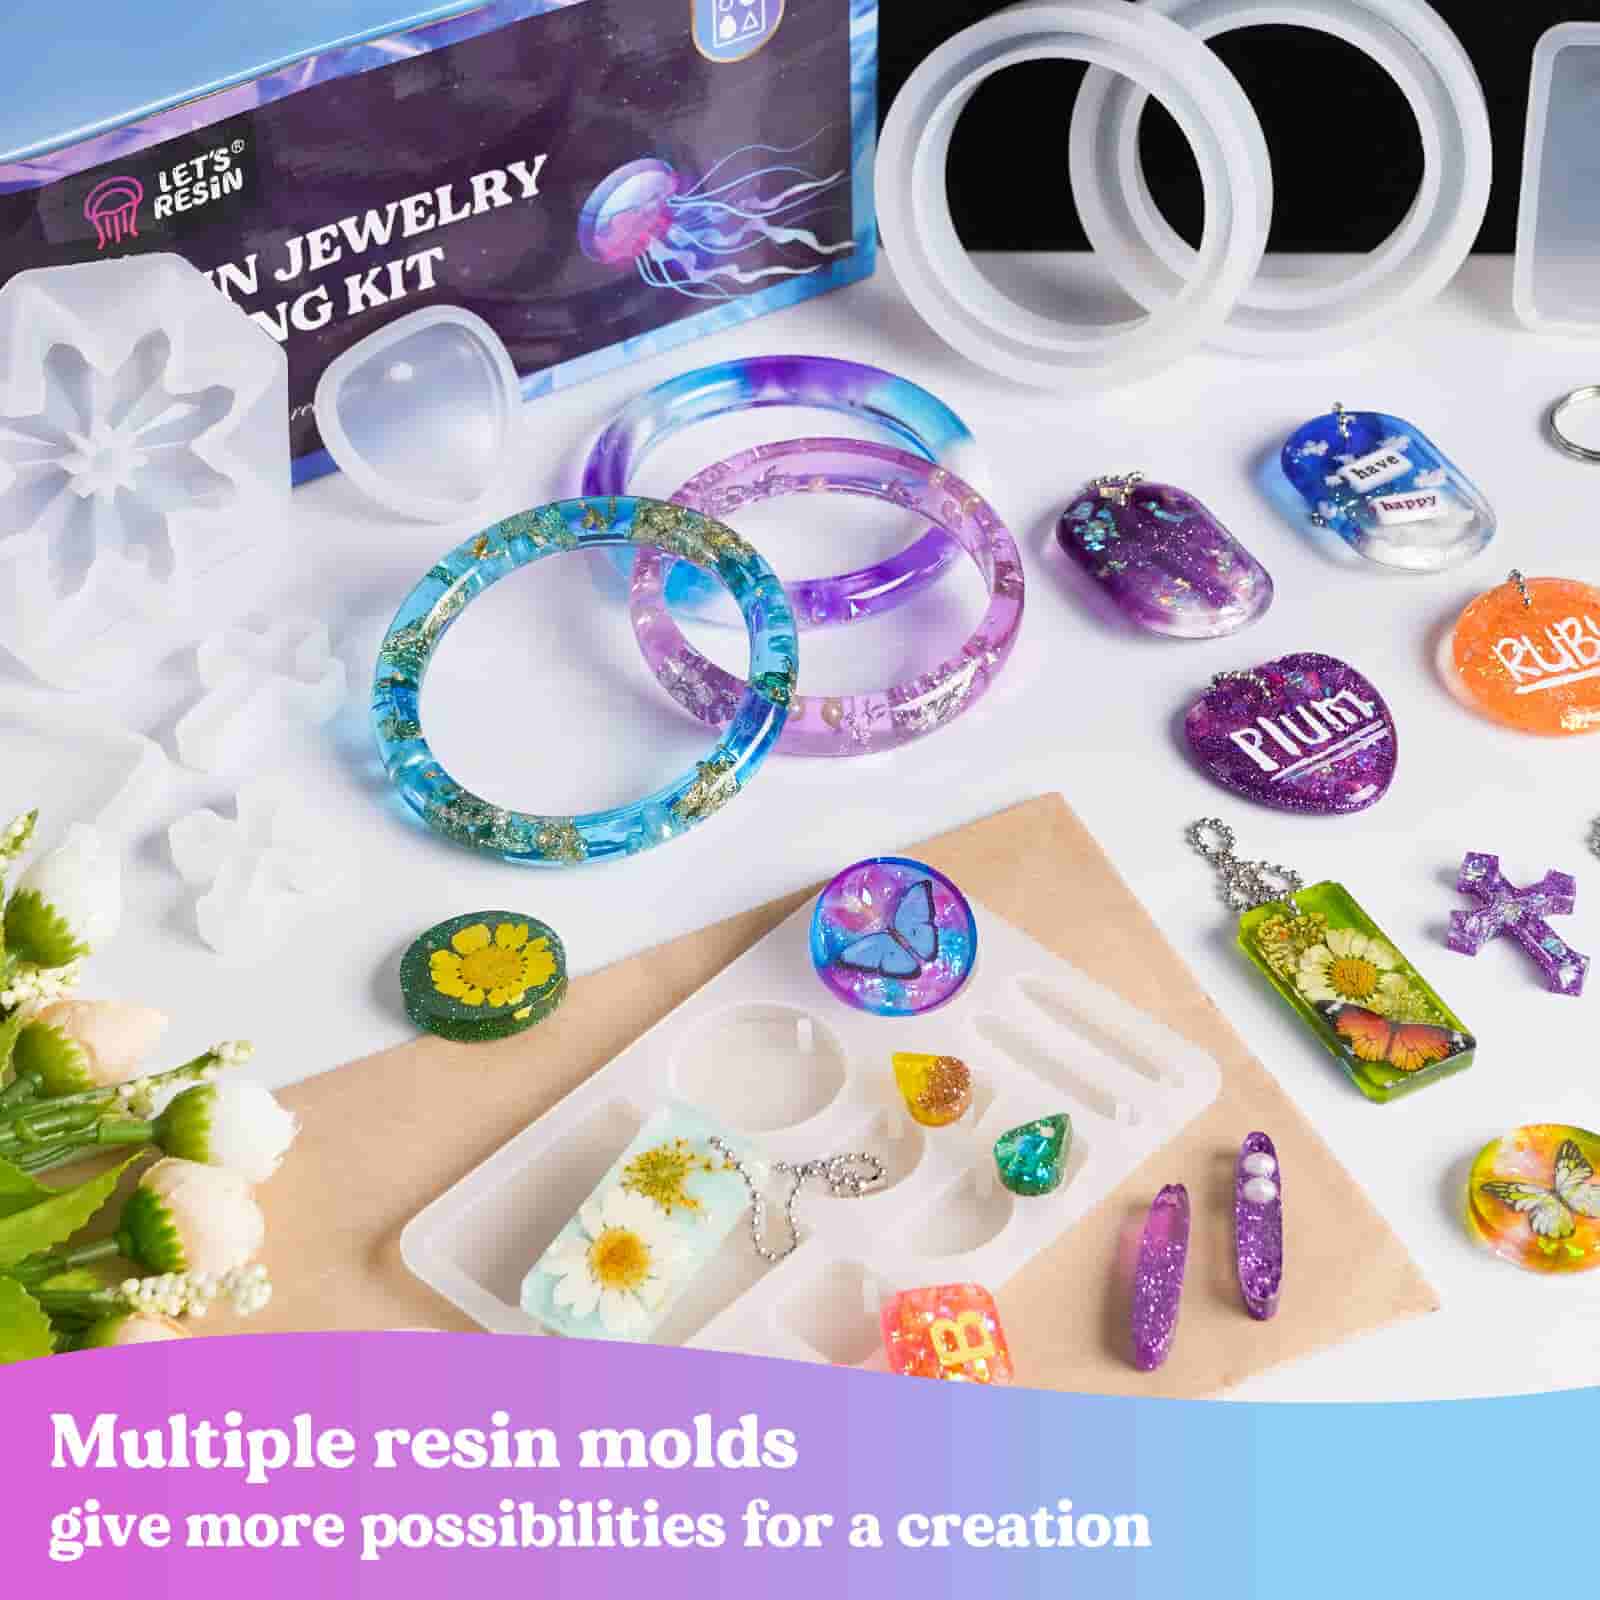 Let's Resin Resin Jewelry Molds Kit